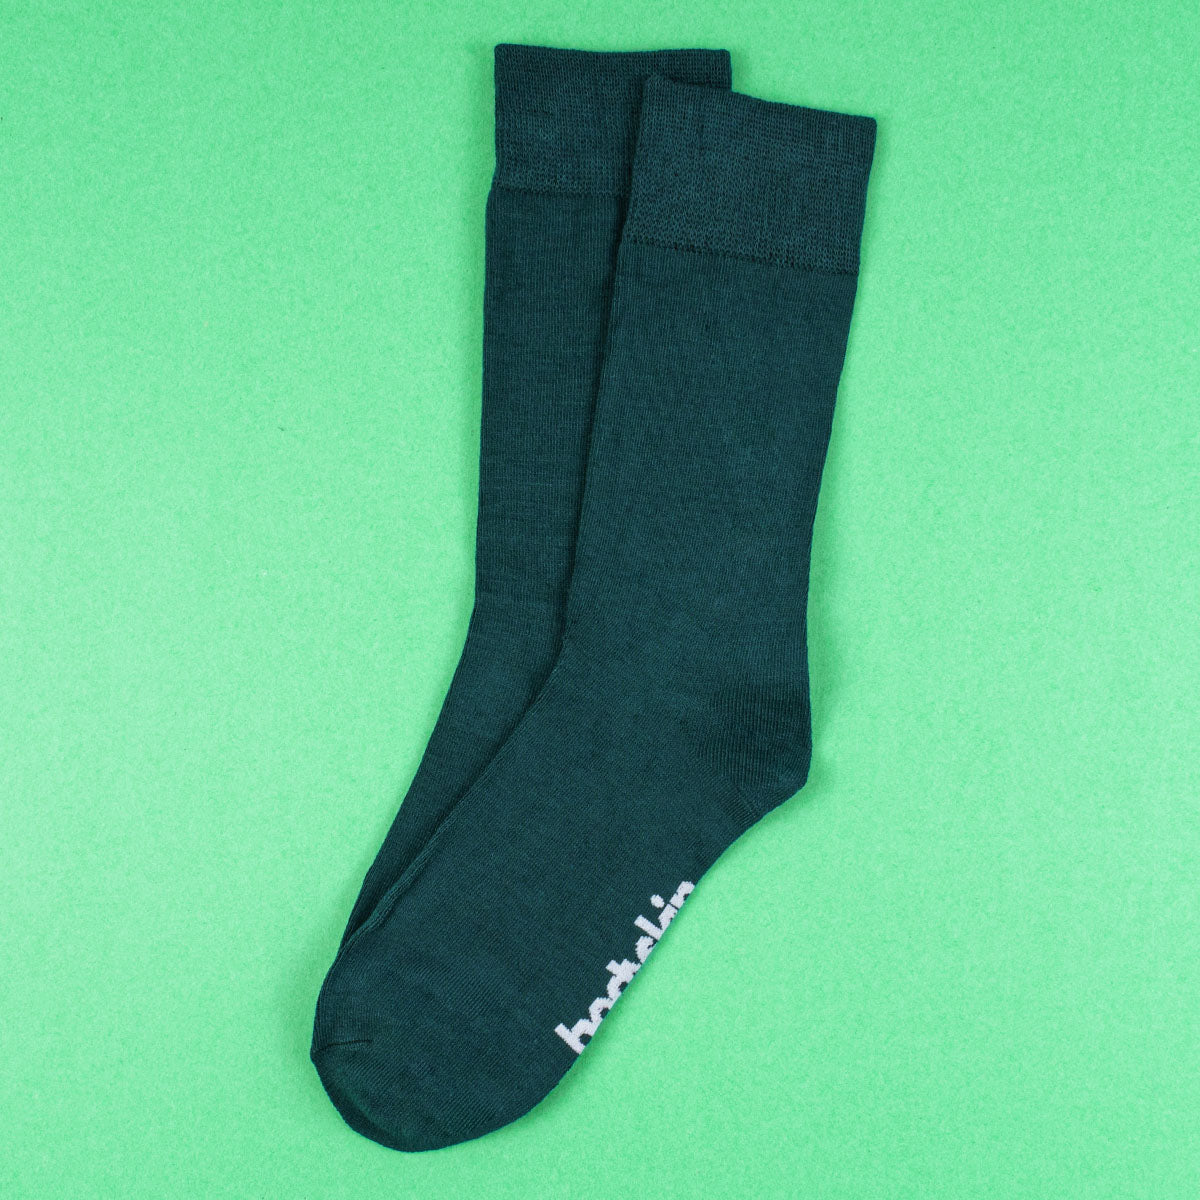 The "The Accountant" Pack 6 pairs of selected Bodyskin socks